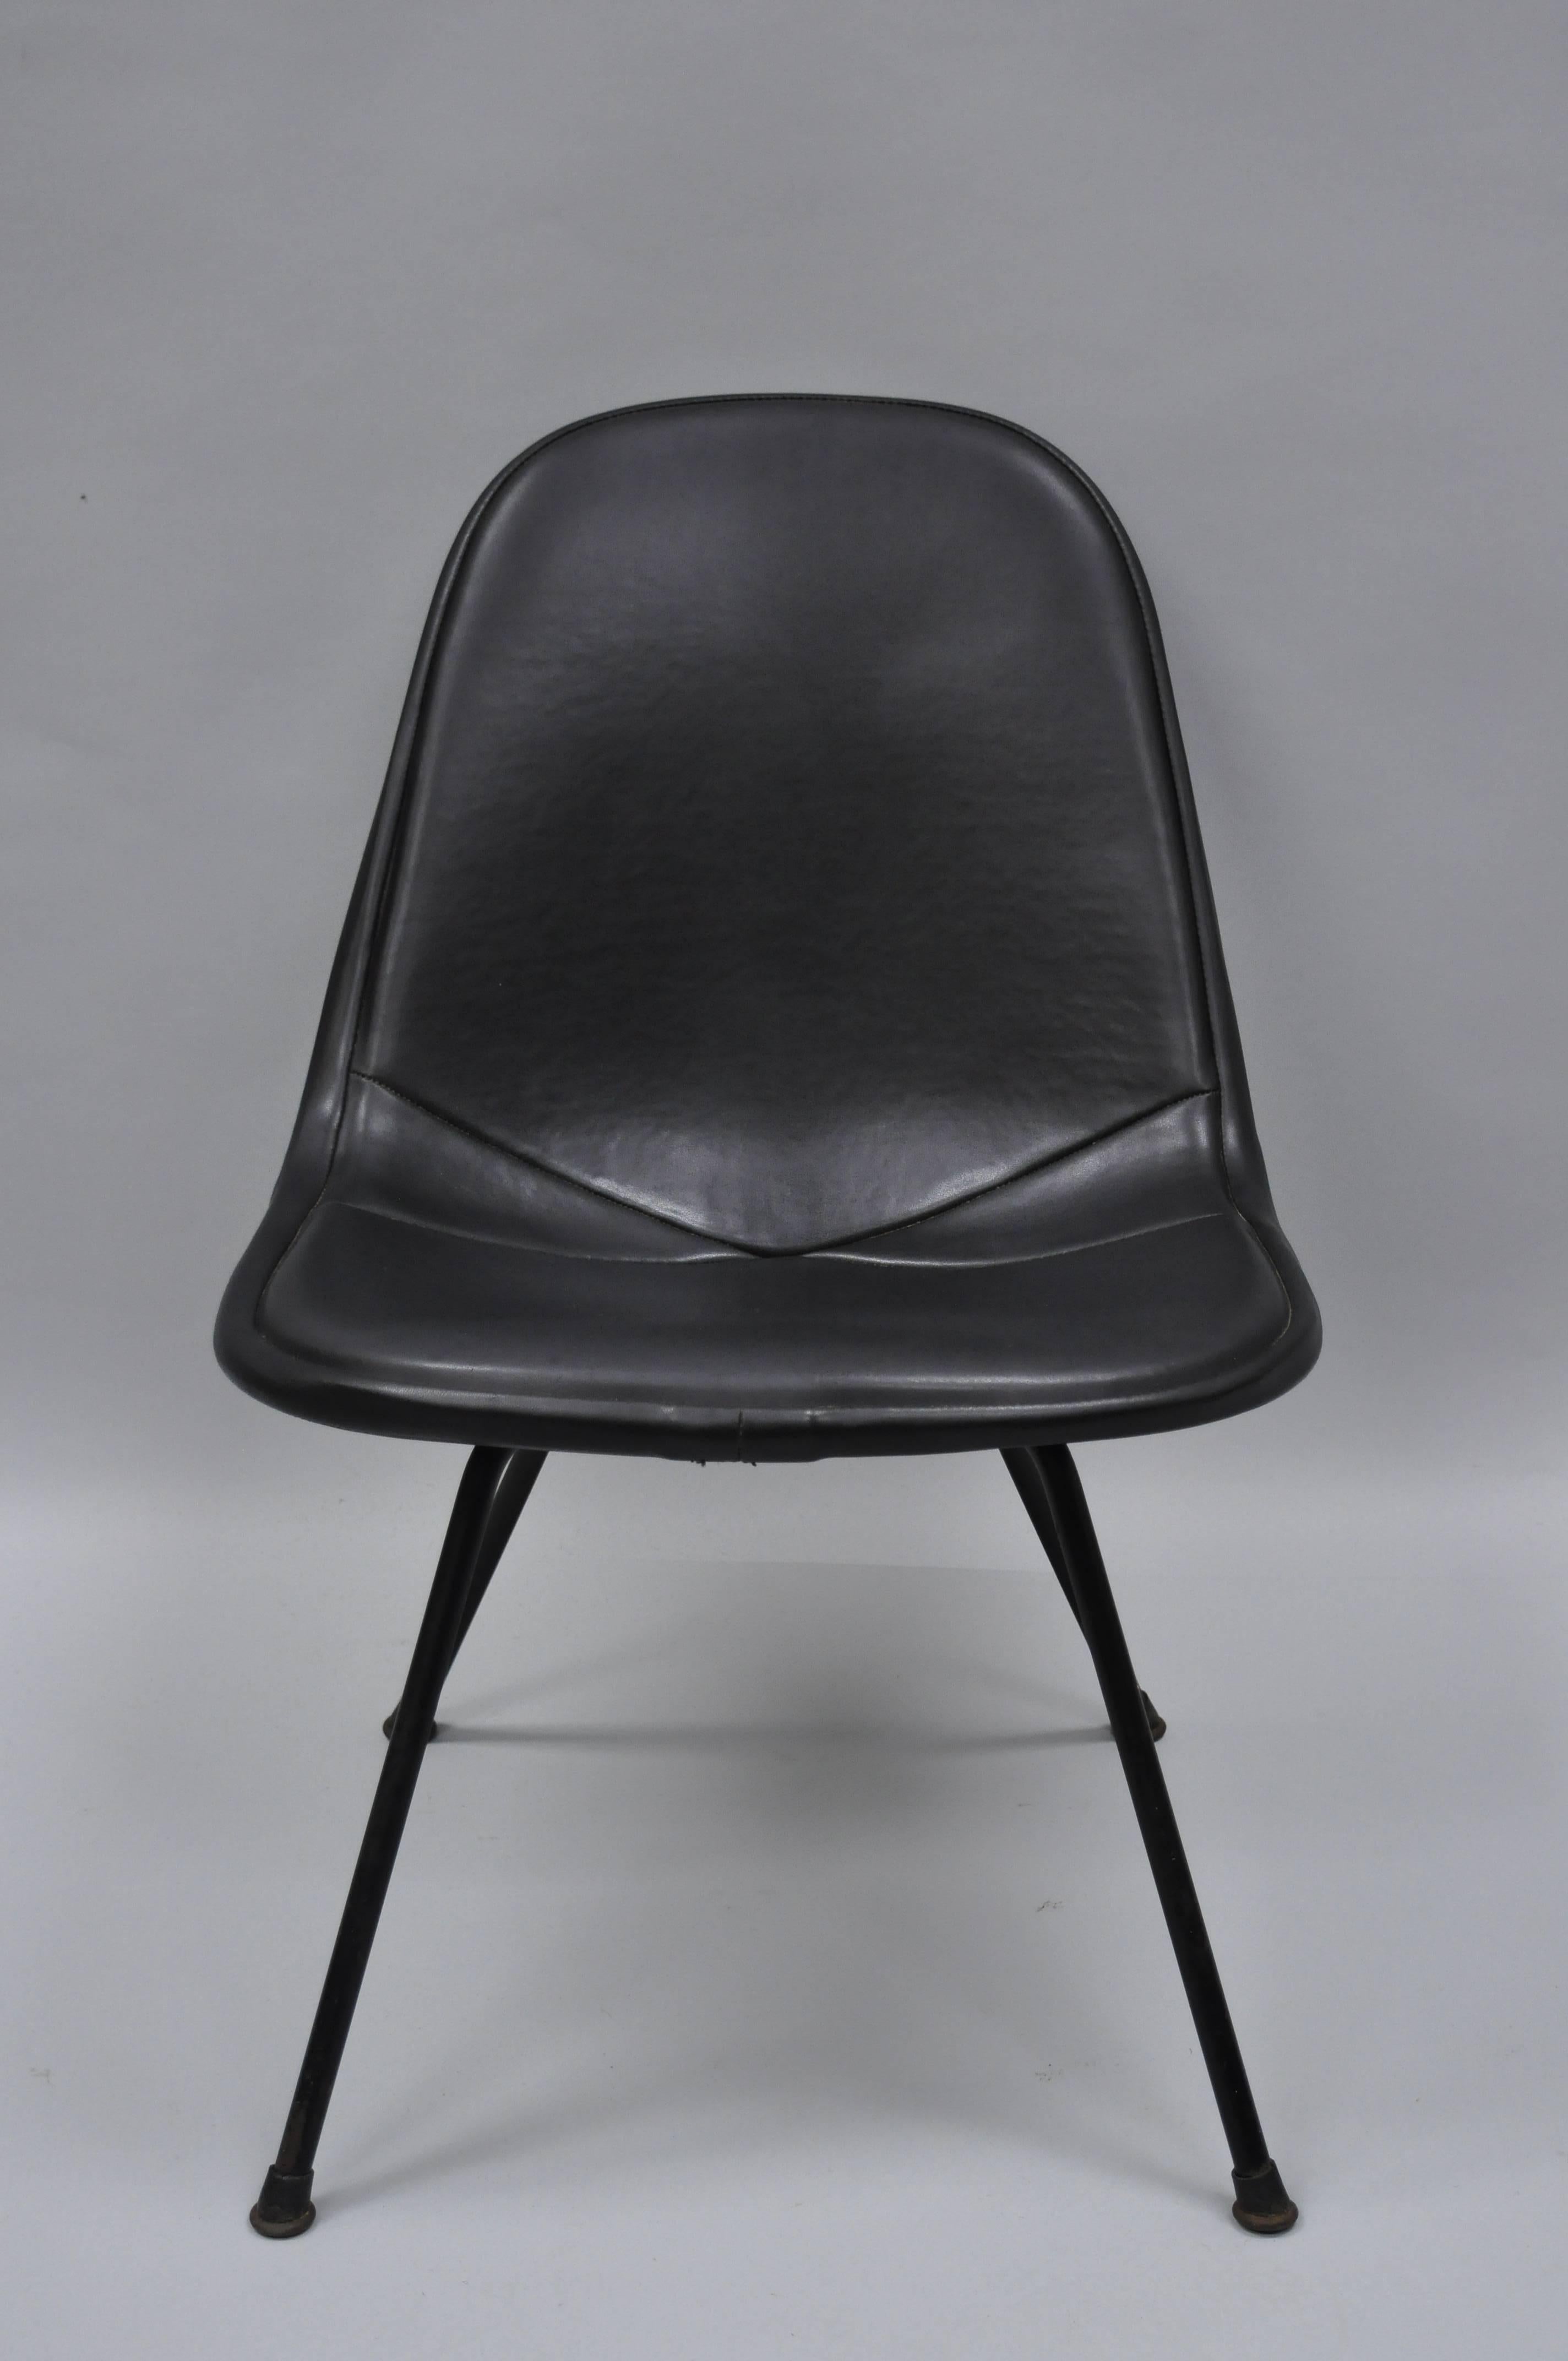 Vintage Eames upholstered DKX wire frame chair for Herman Miller on its original low black base. Item features believed to be an original 1st edition vinyl upholstered DKX chair on its original low ‘X’ base. Herman Miller tag to underside, circa